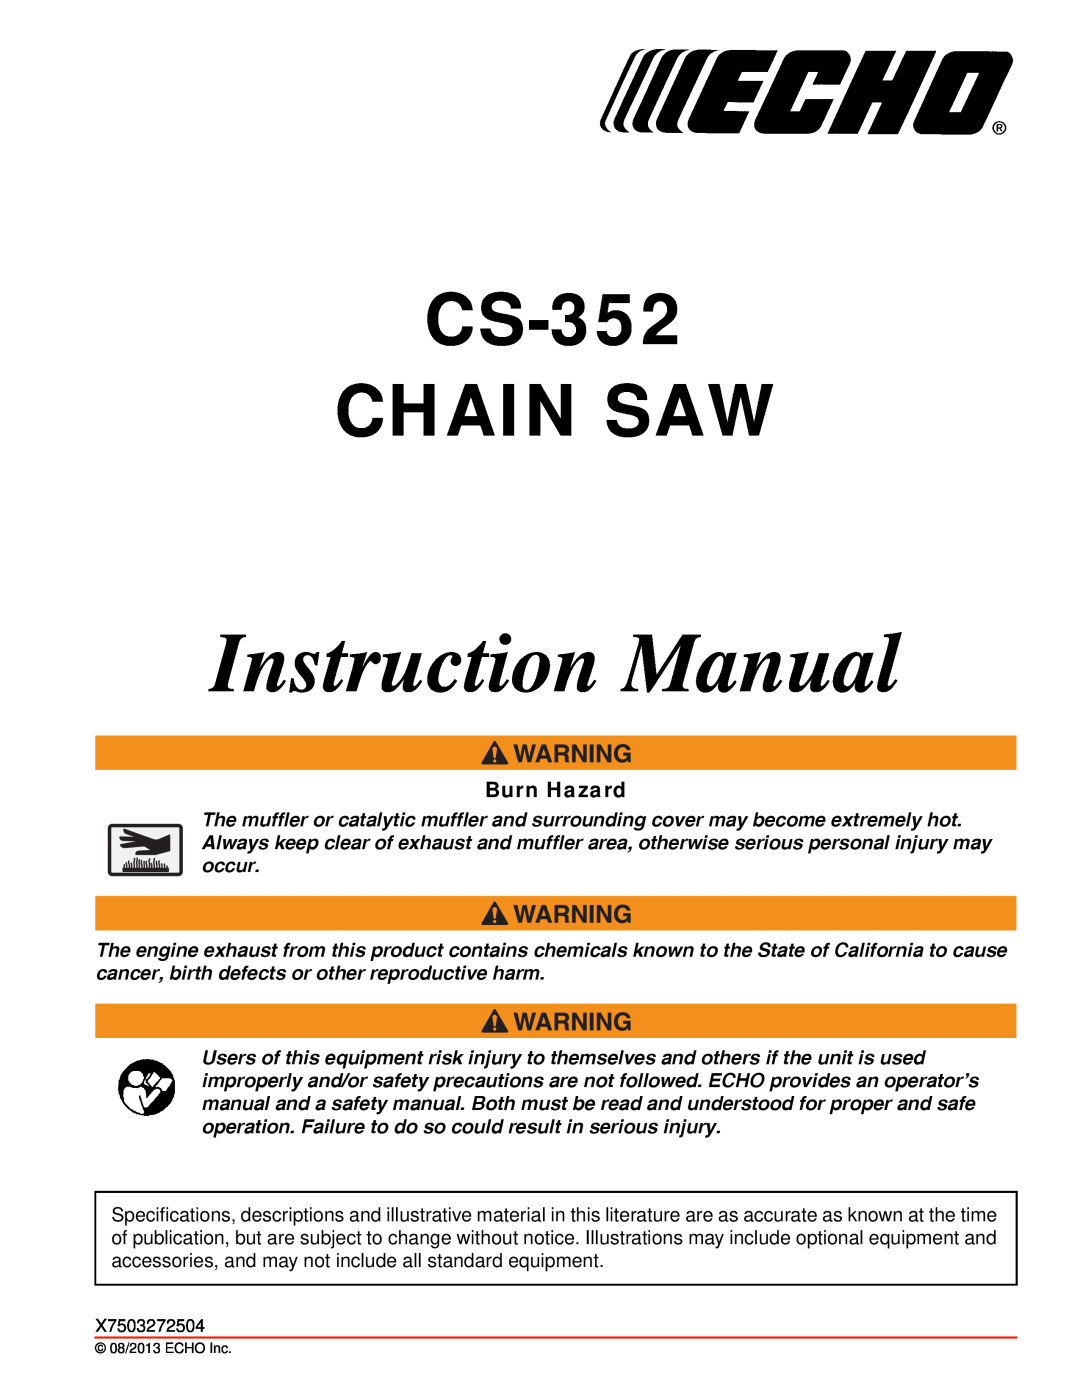 Echo instruction manual Failure to do so could result in serious injury, INSTRUCTION MANUAL CHAIN SAW CS-352 